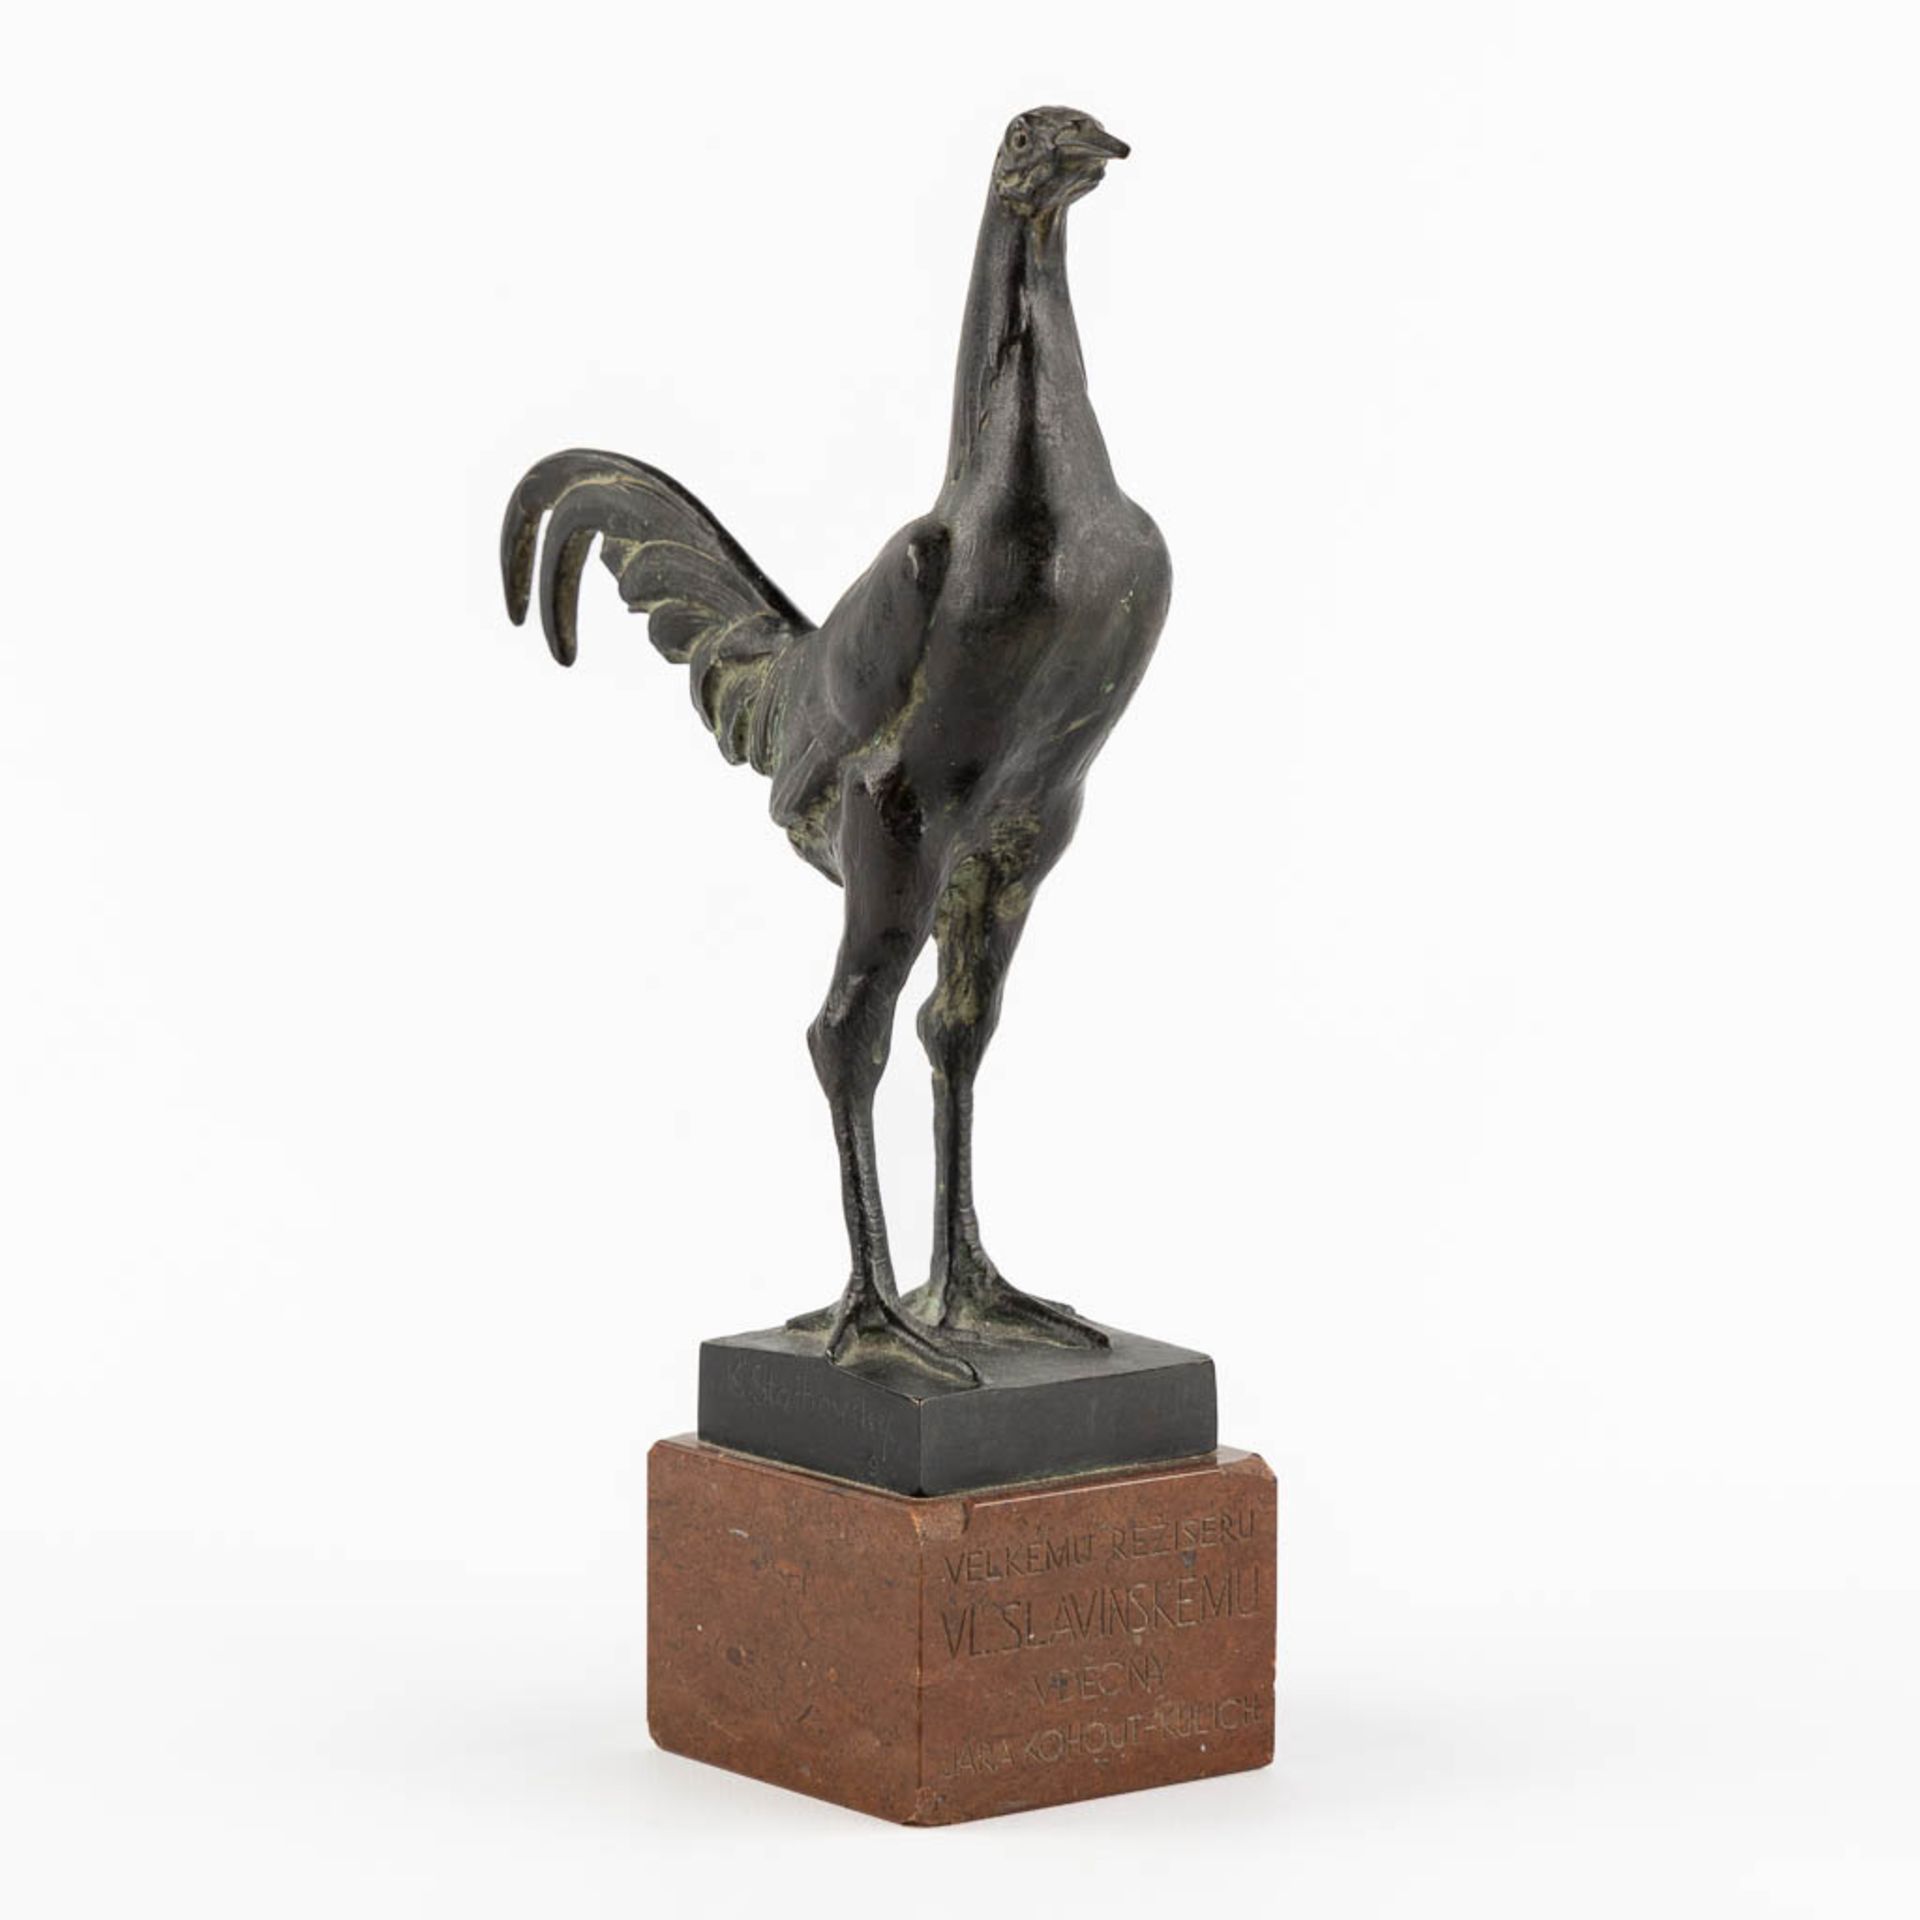 K. STACHOWSKY (XIX-XX) 'Rooster' patinated bronze on marble. (L:15 x W:7 x H:26 cm)